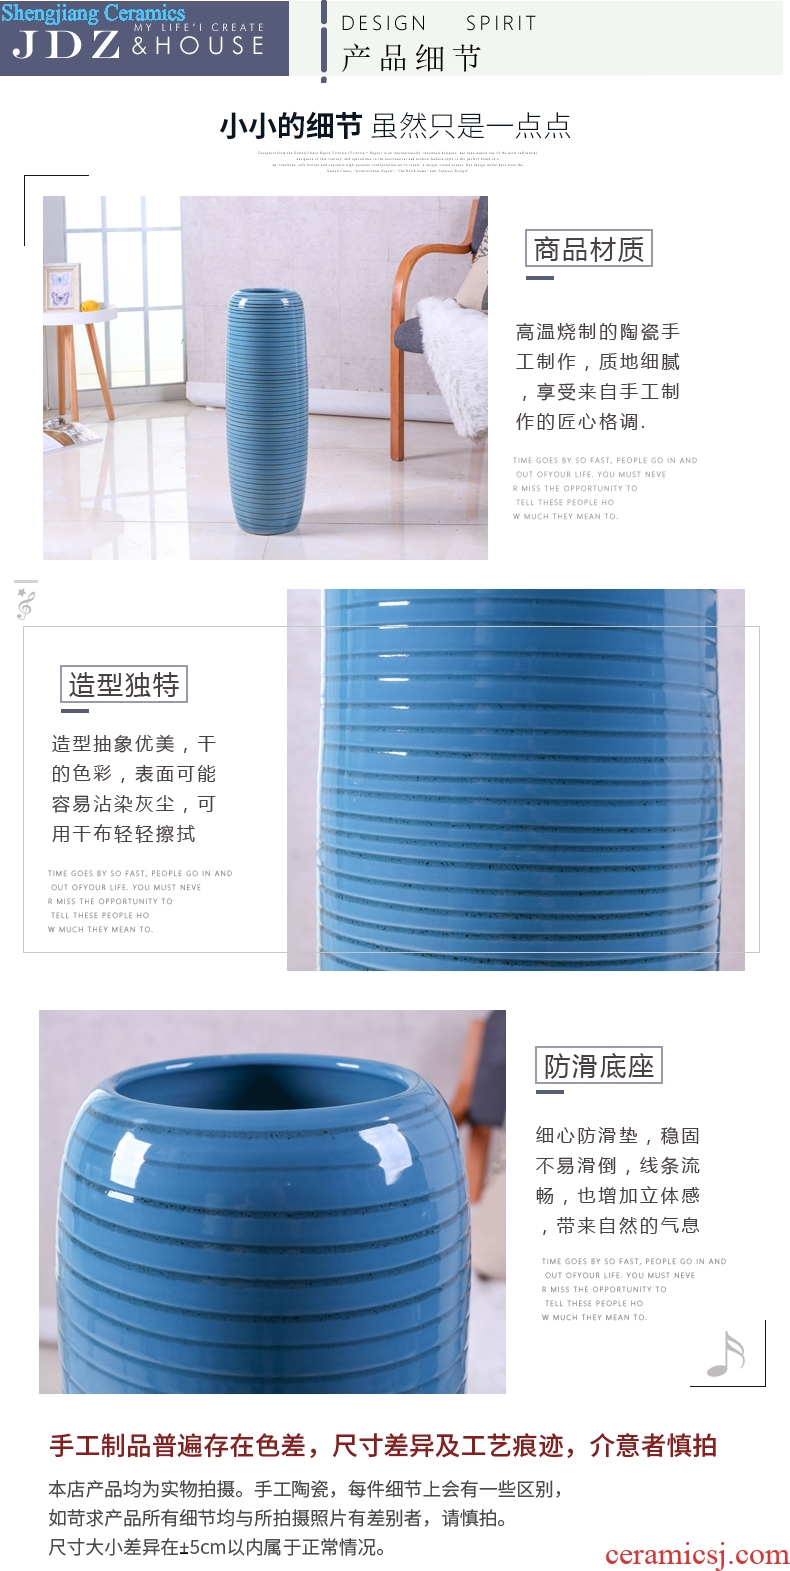 Porch ground vase jingdezhen ceramic sitting room Nordic simulation flower suit contemporary and contracted large furnishing articles arranging flowers